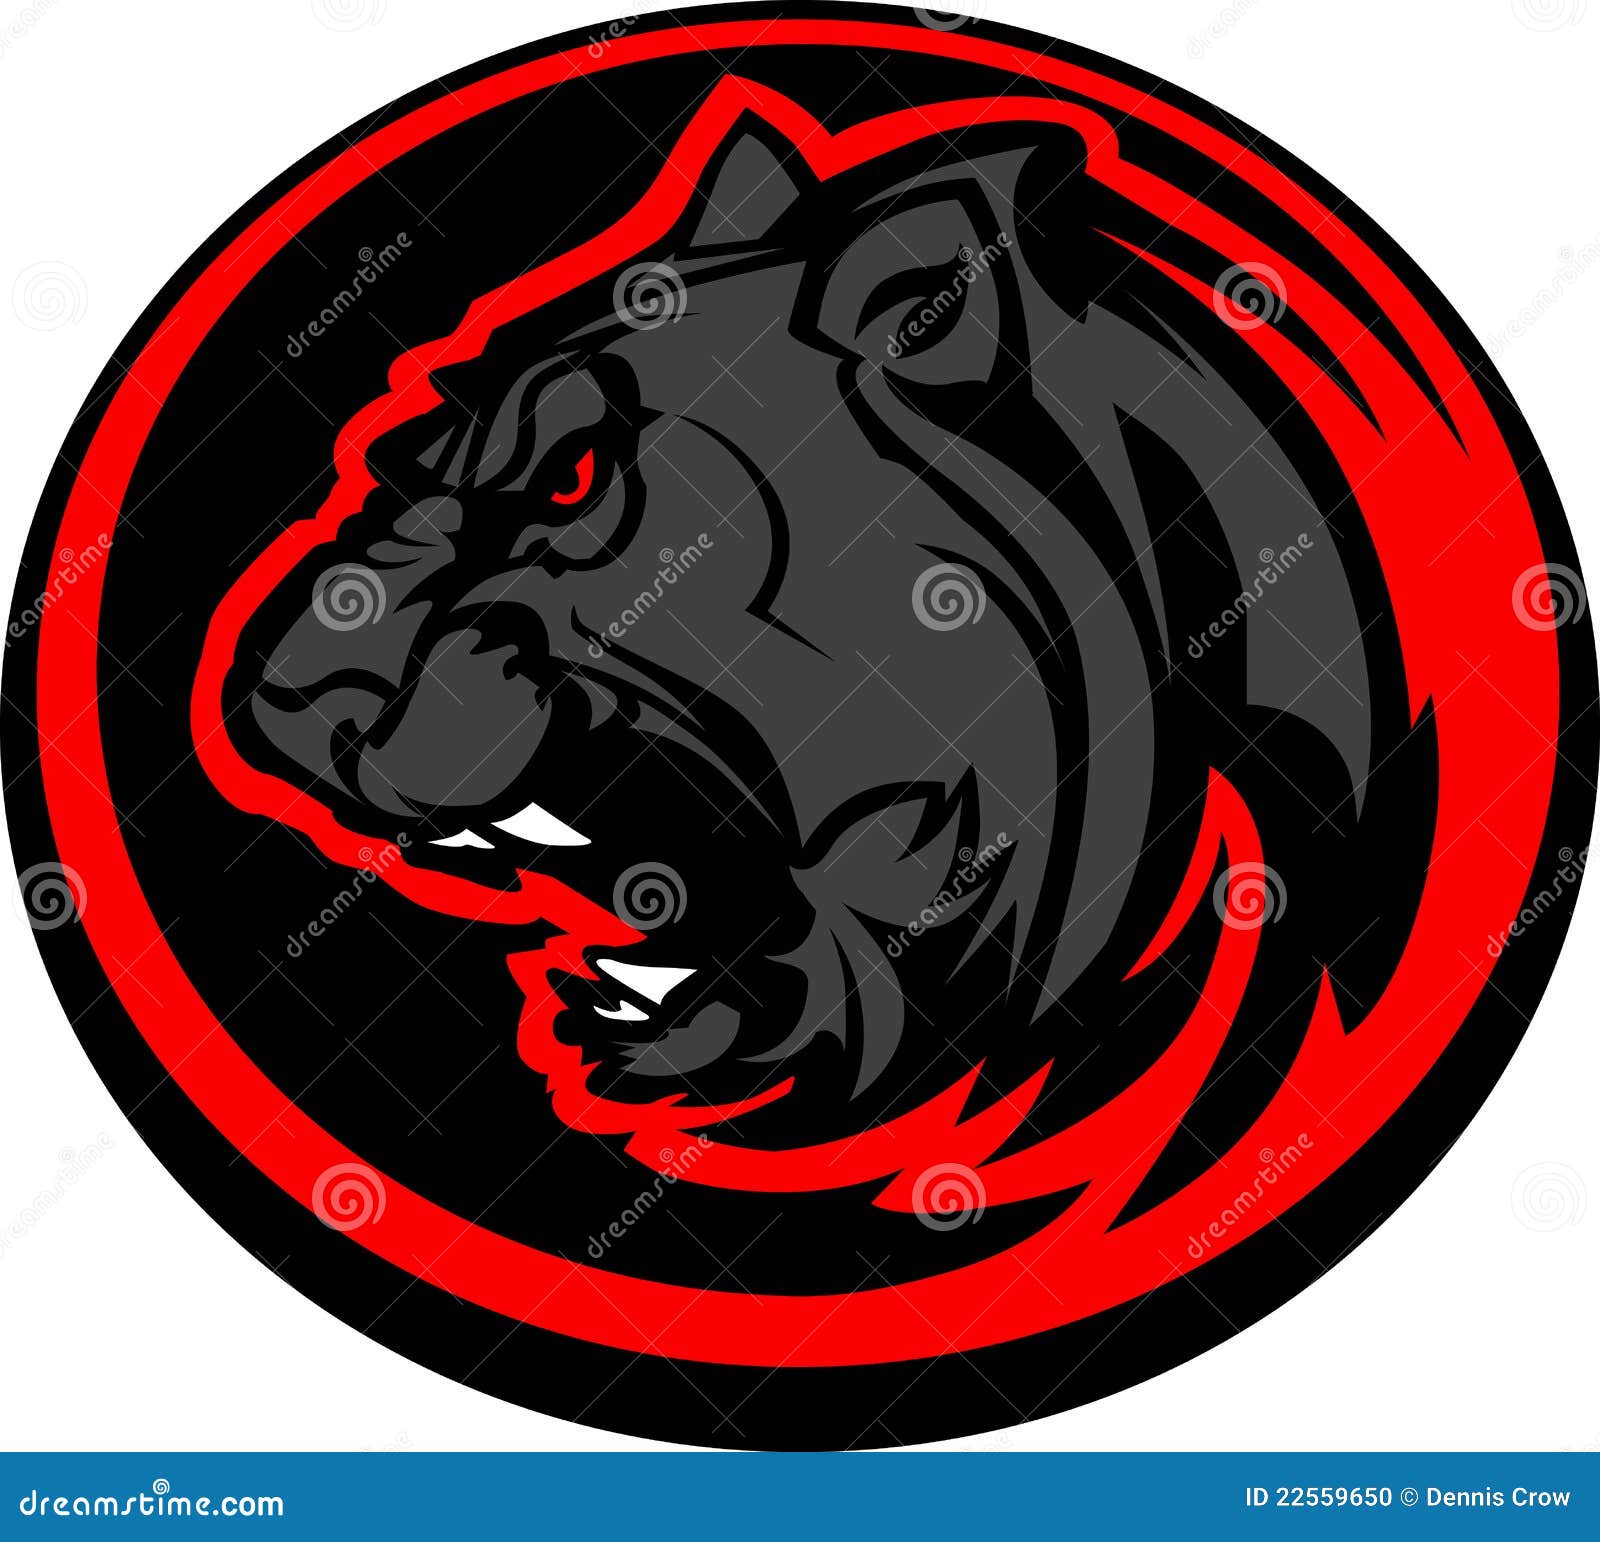 Panther Mascot Head Graphic Stock Vector - Illustration of sports, cats ...